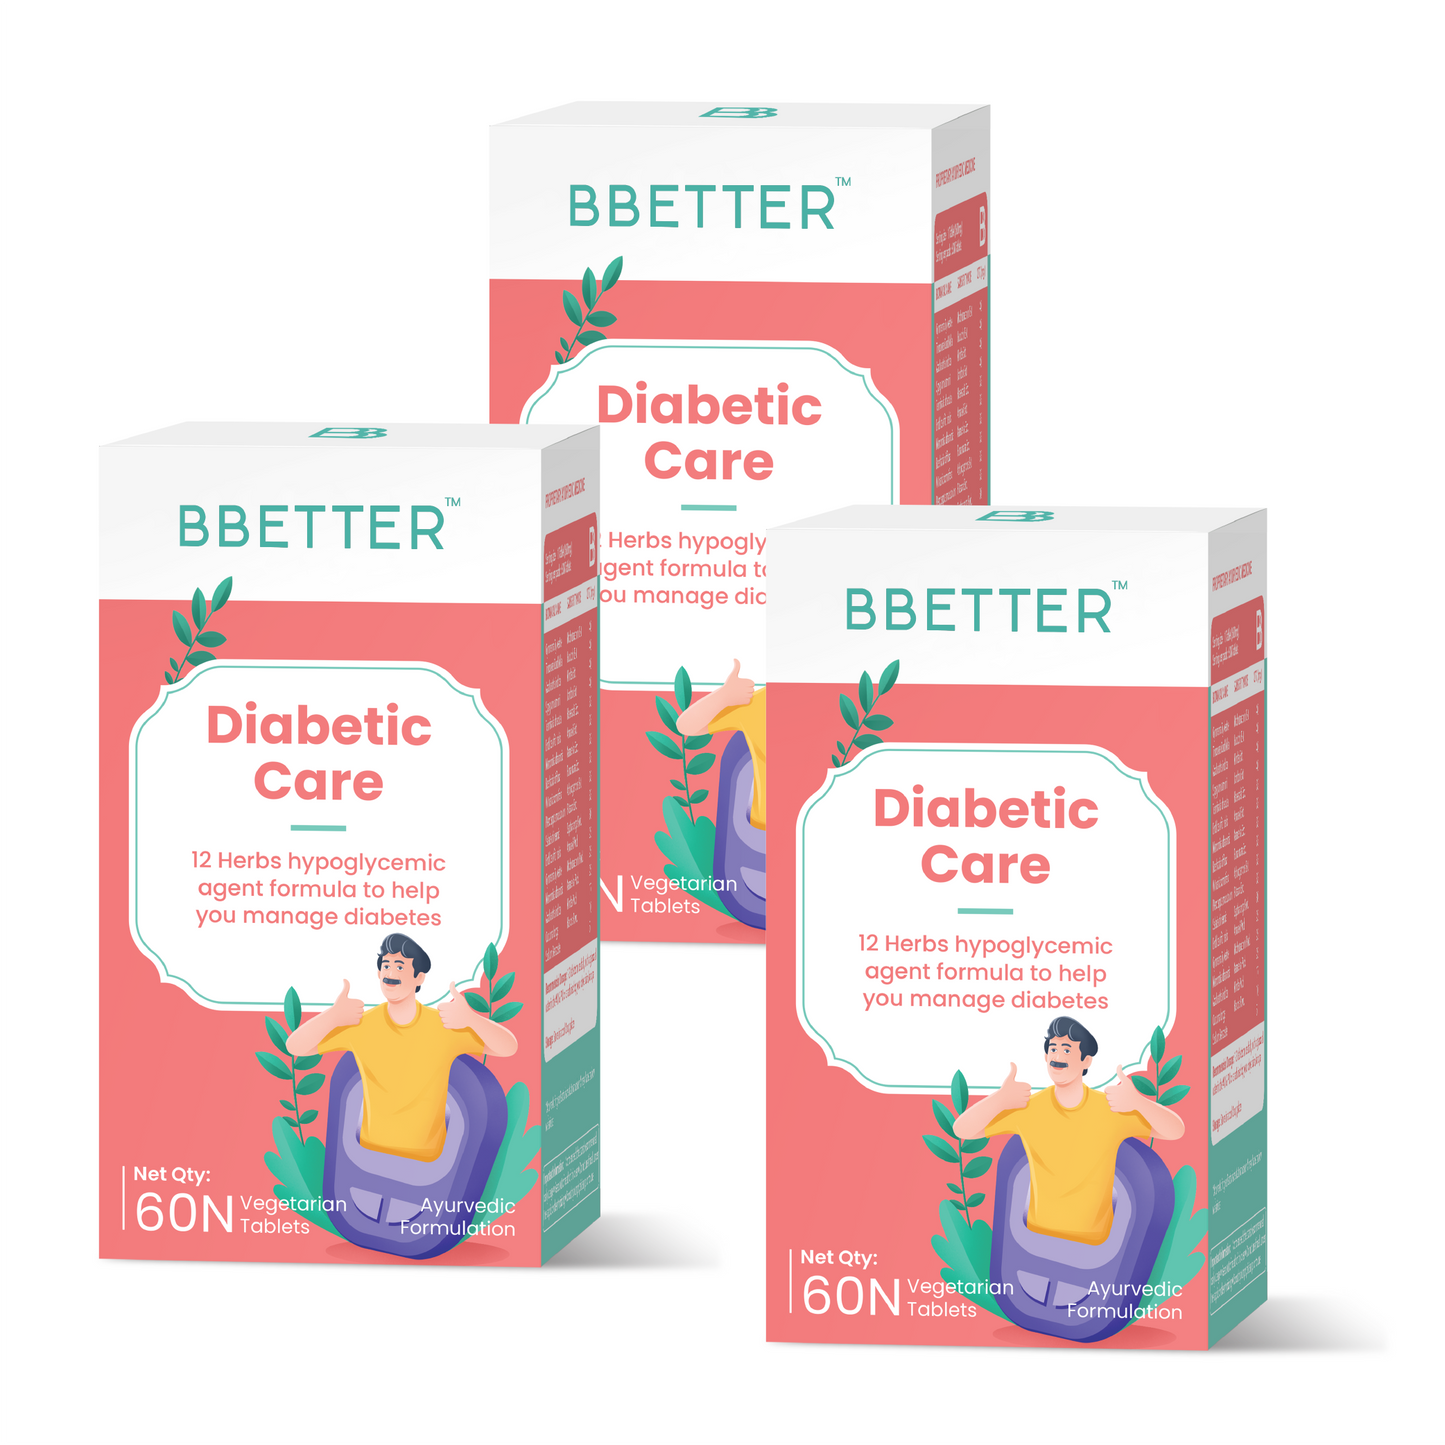 BBETTER Diabetic Care - 3 Month Supply